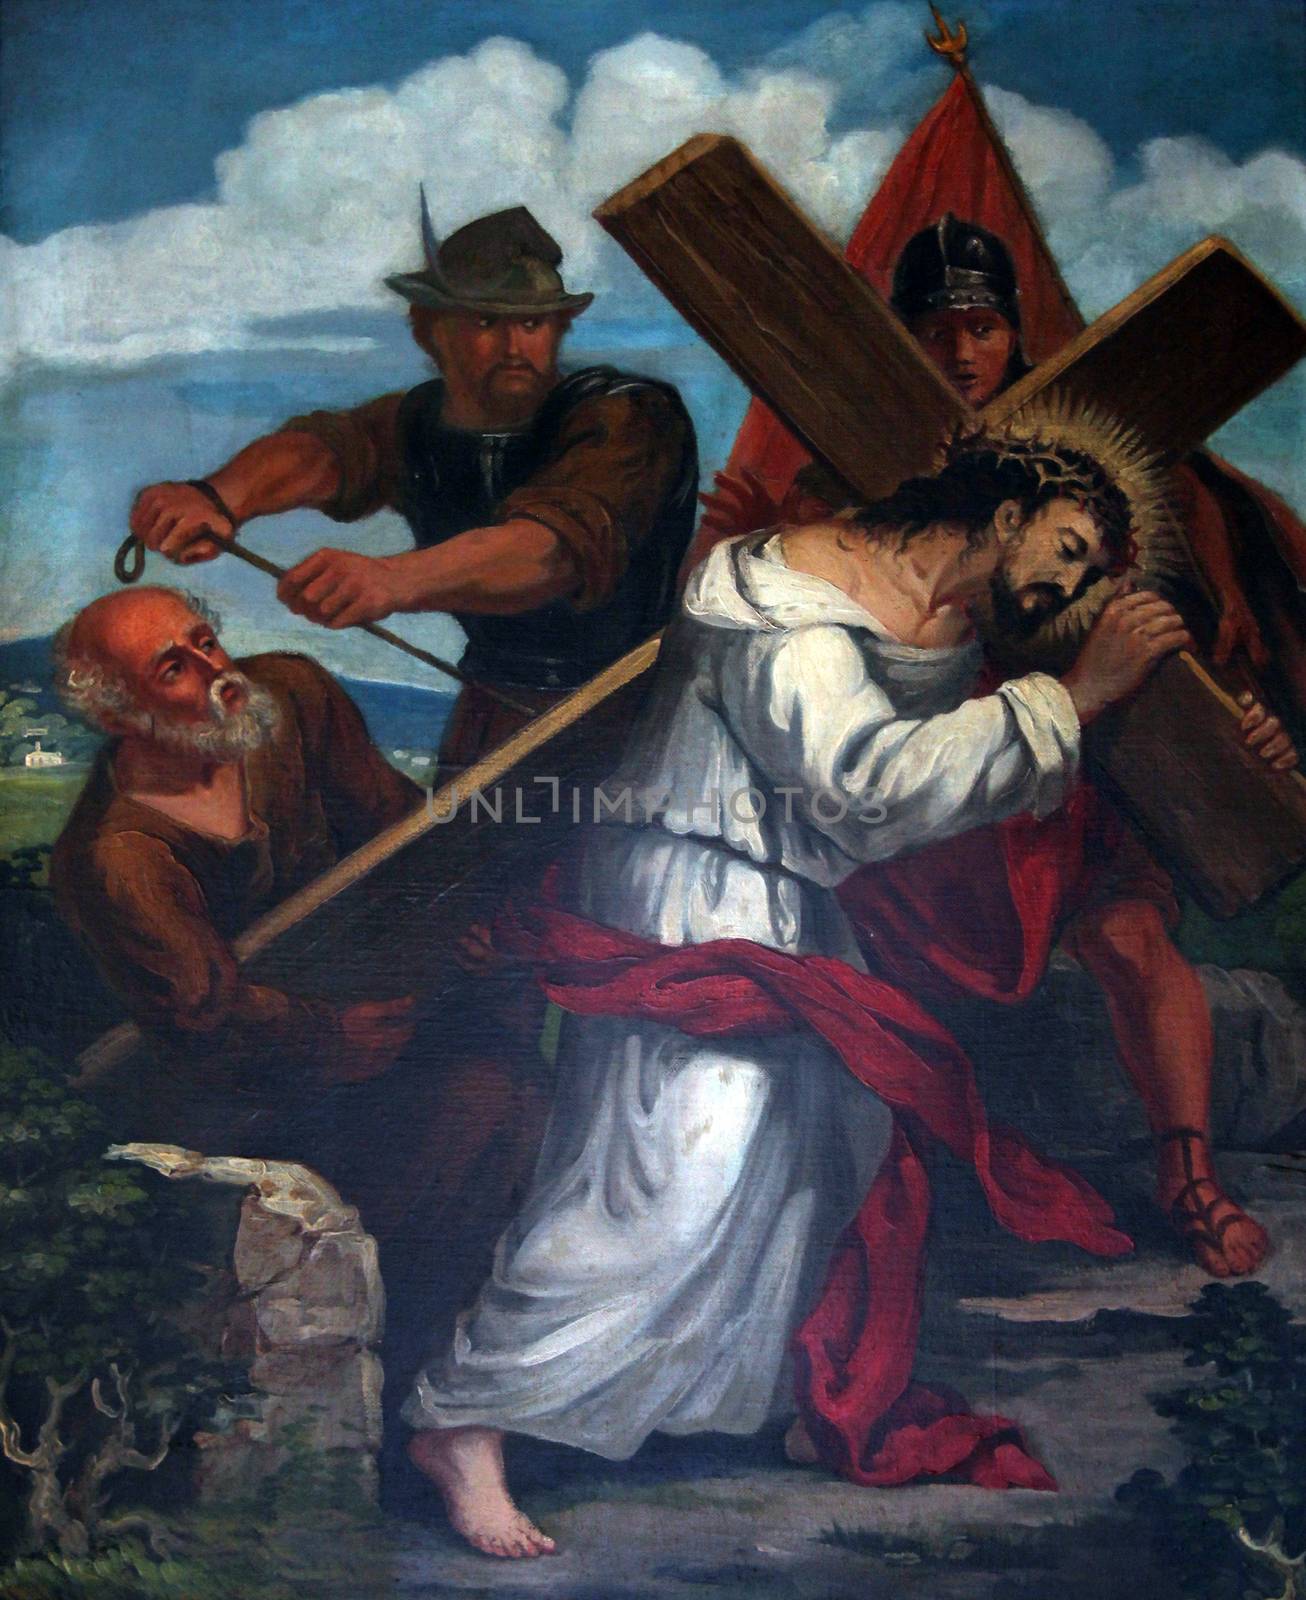 5th Stations of the Cross, Simon of Cyrene carries the cross by atlas